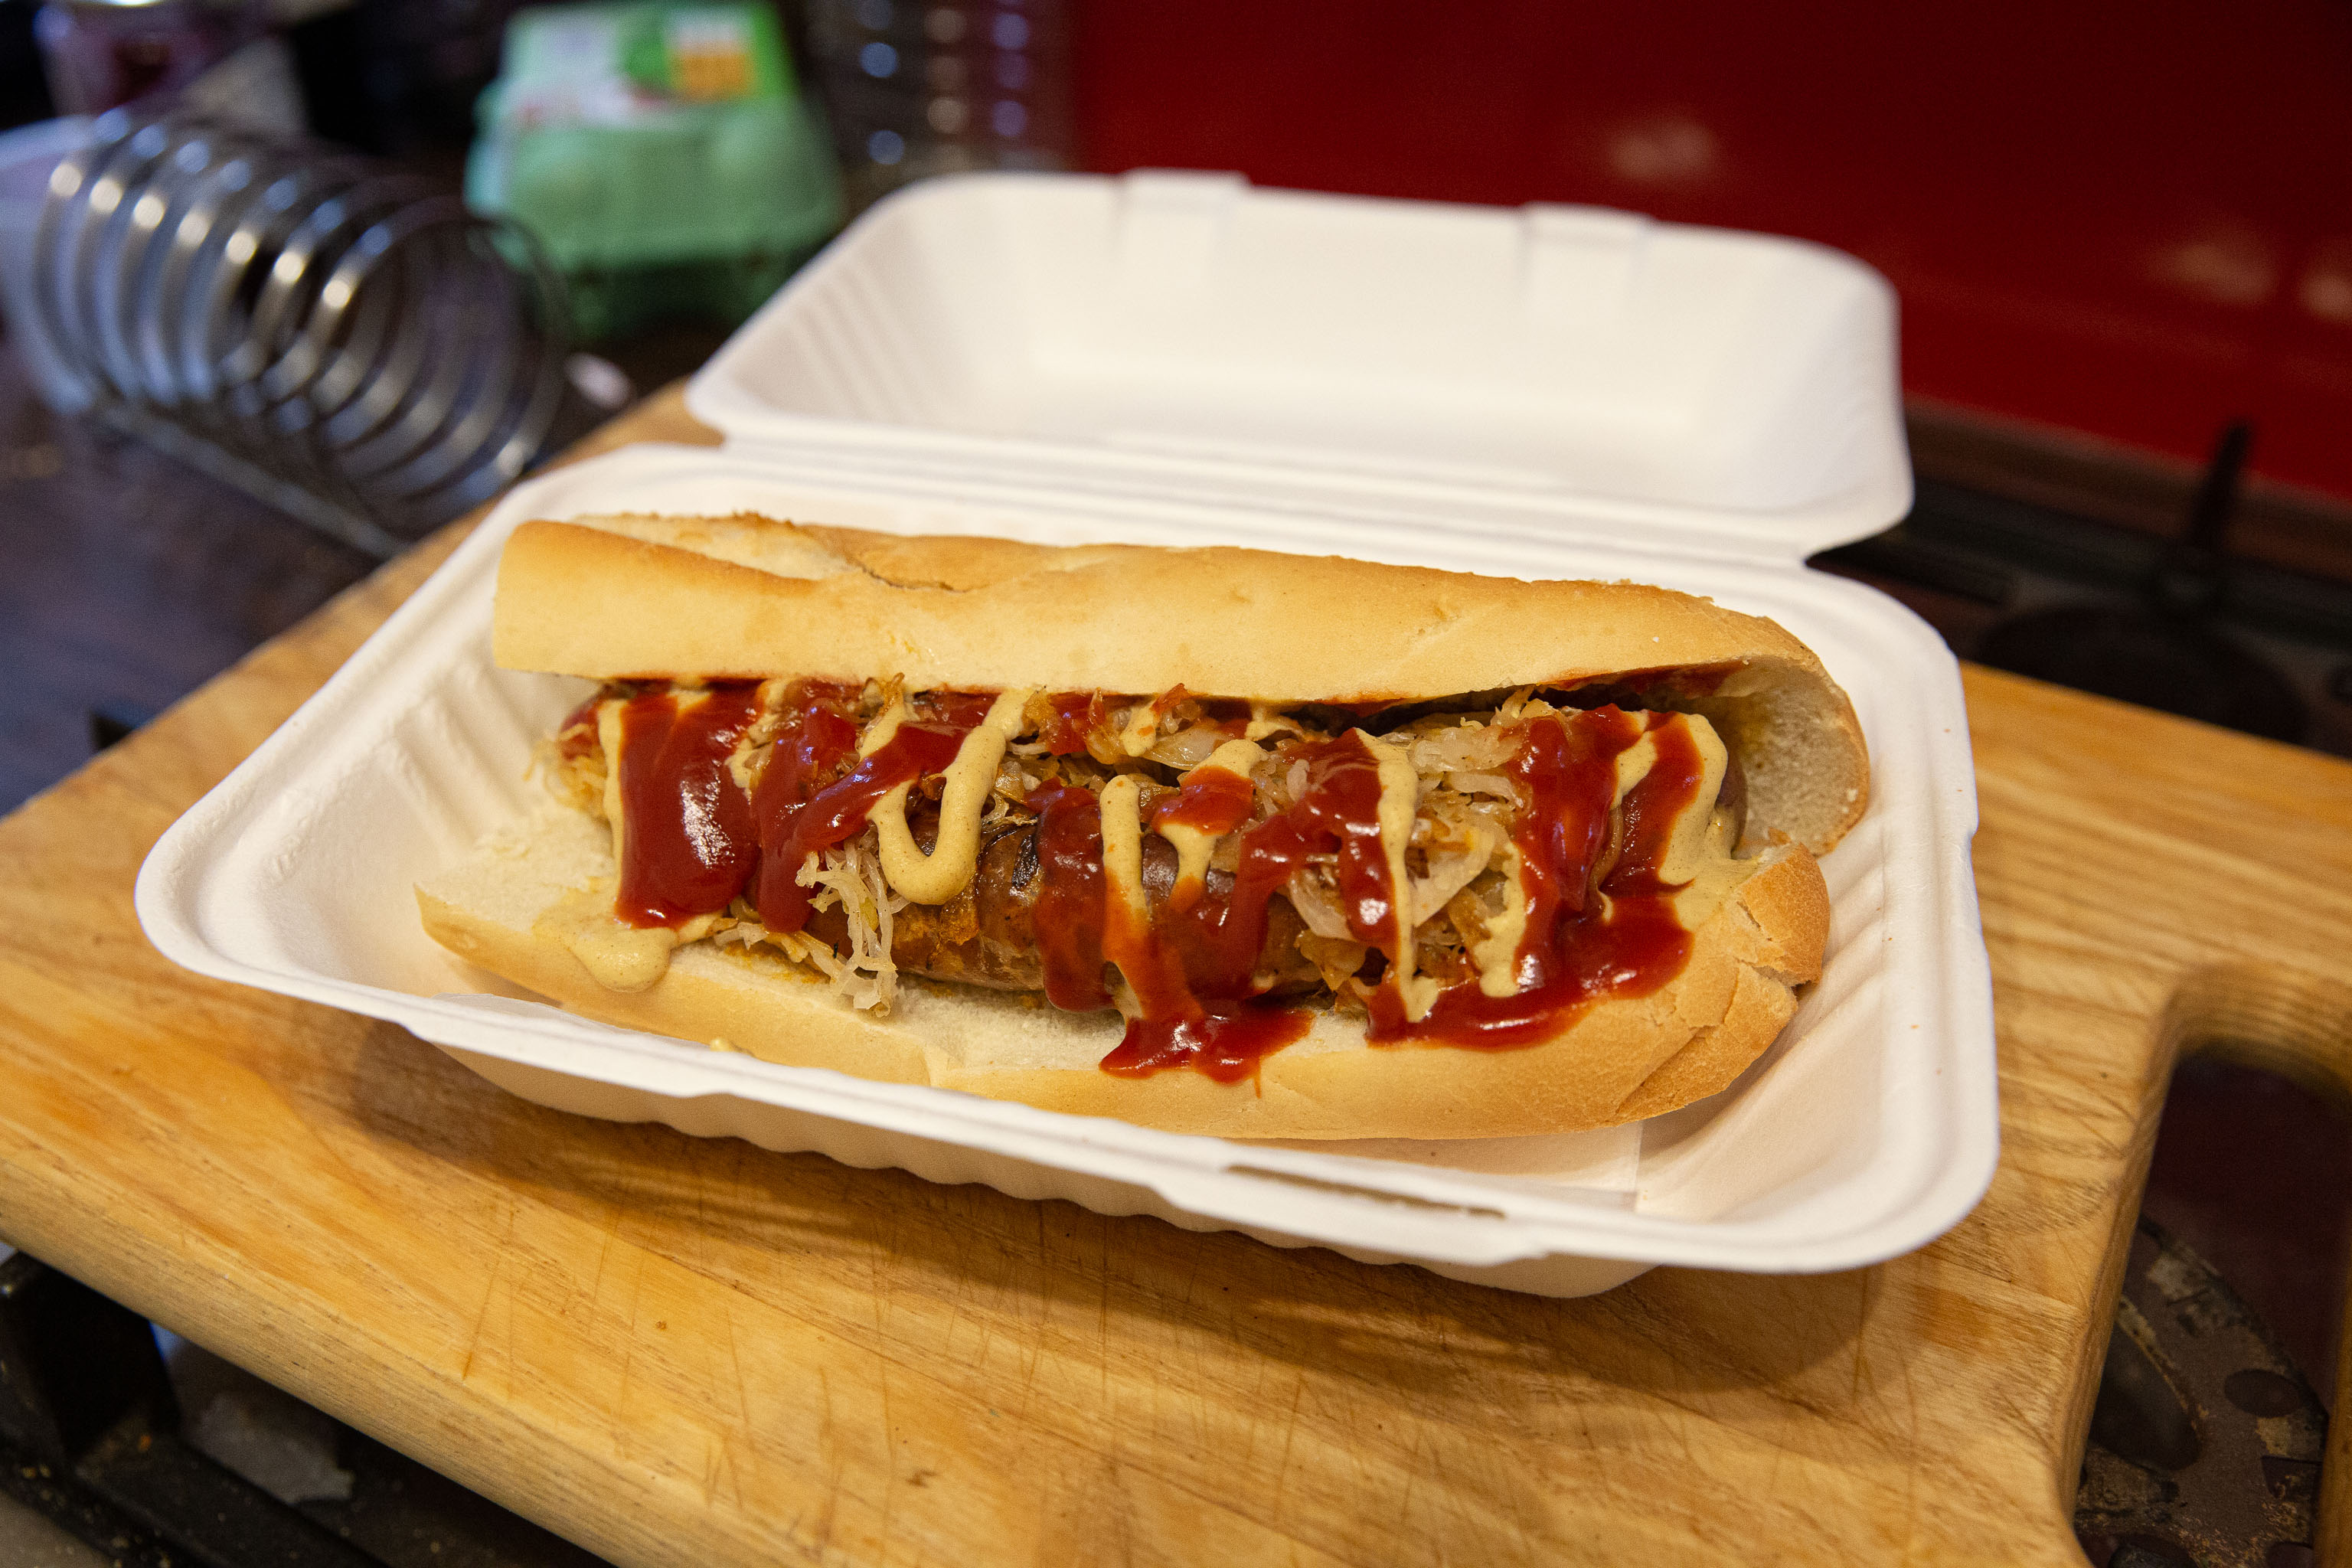 Hungarian Grilled Sausage Dog
From the Budapest Cafe, Alma Vale Road.
